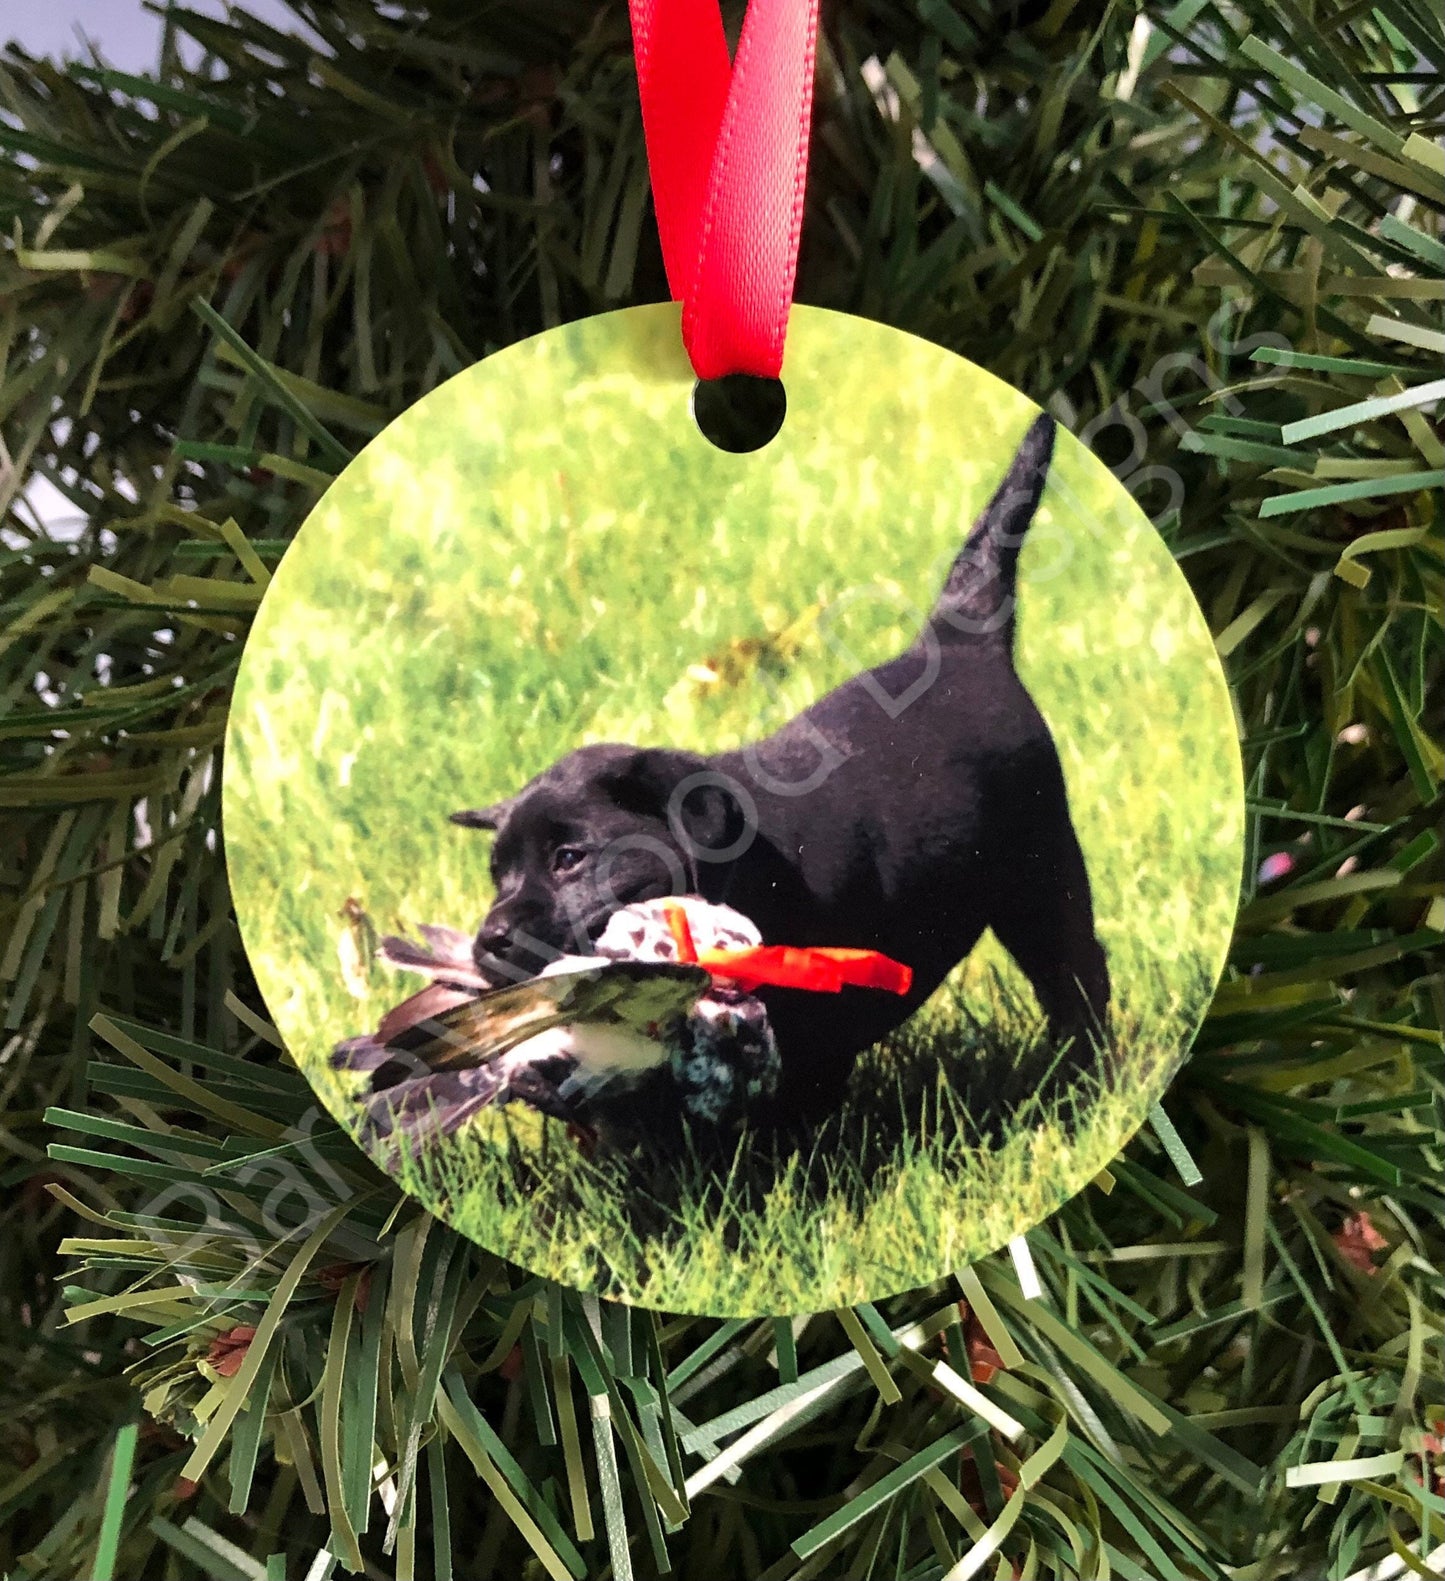 Personalized Christmas Ornament With Your Photo